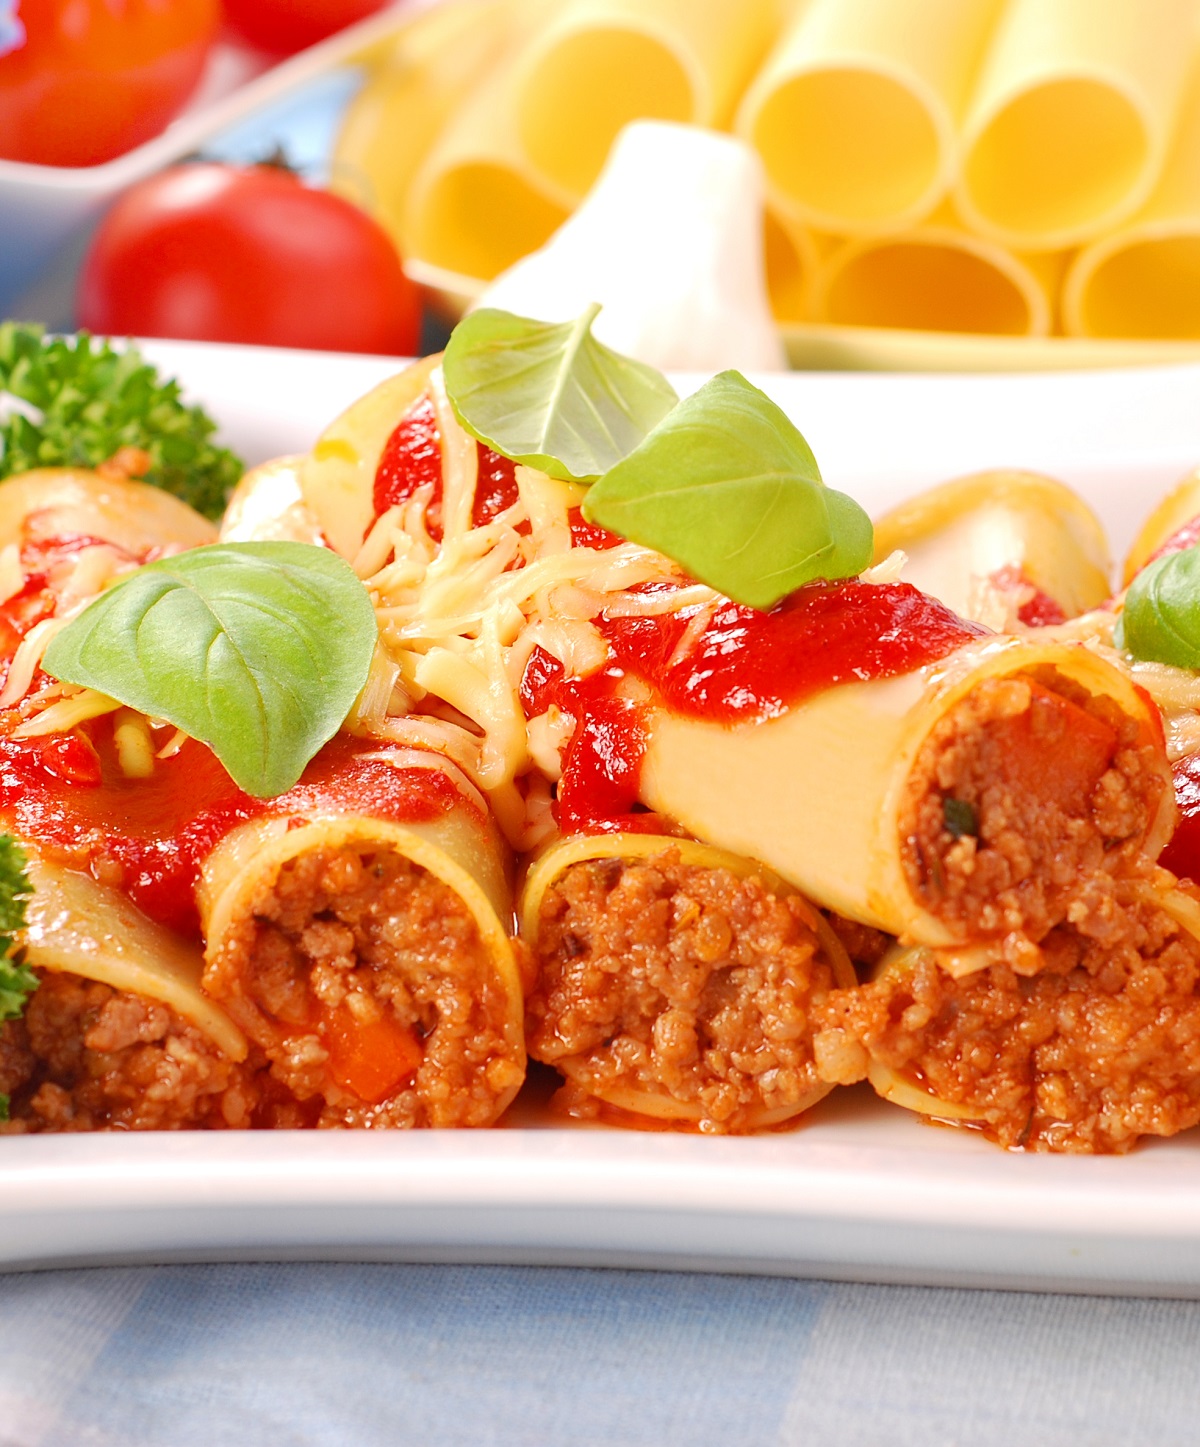 Italian,Cannelloni,Stuffed,With,Minced,Meat,Poured,Tomato,Sauce